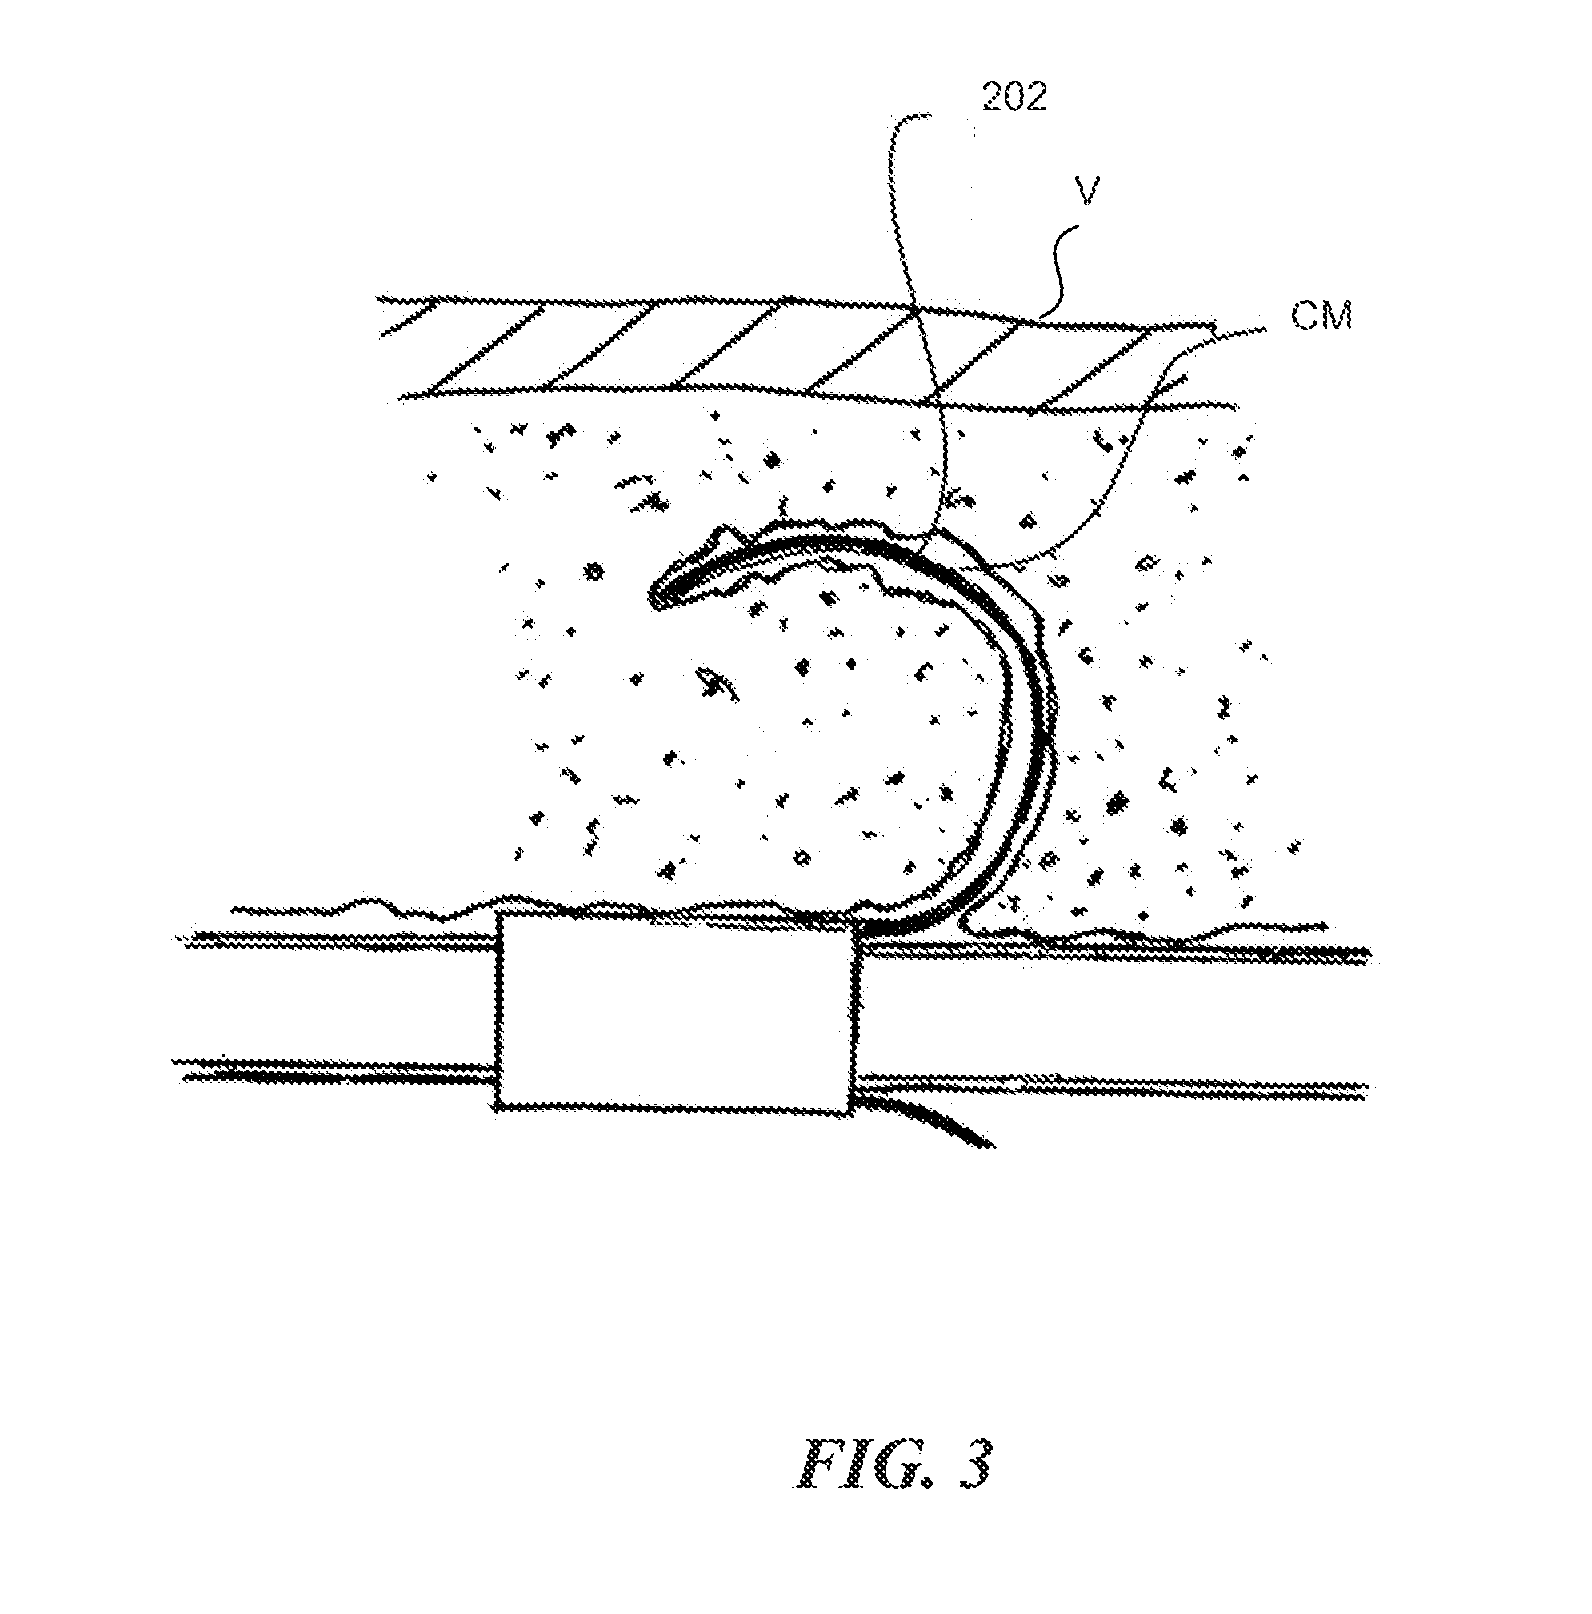 Methods and apparatus for treating embolism